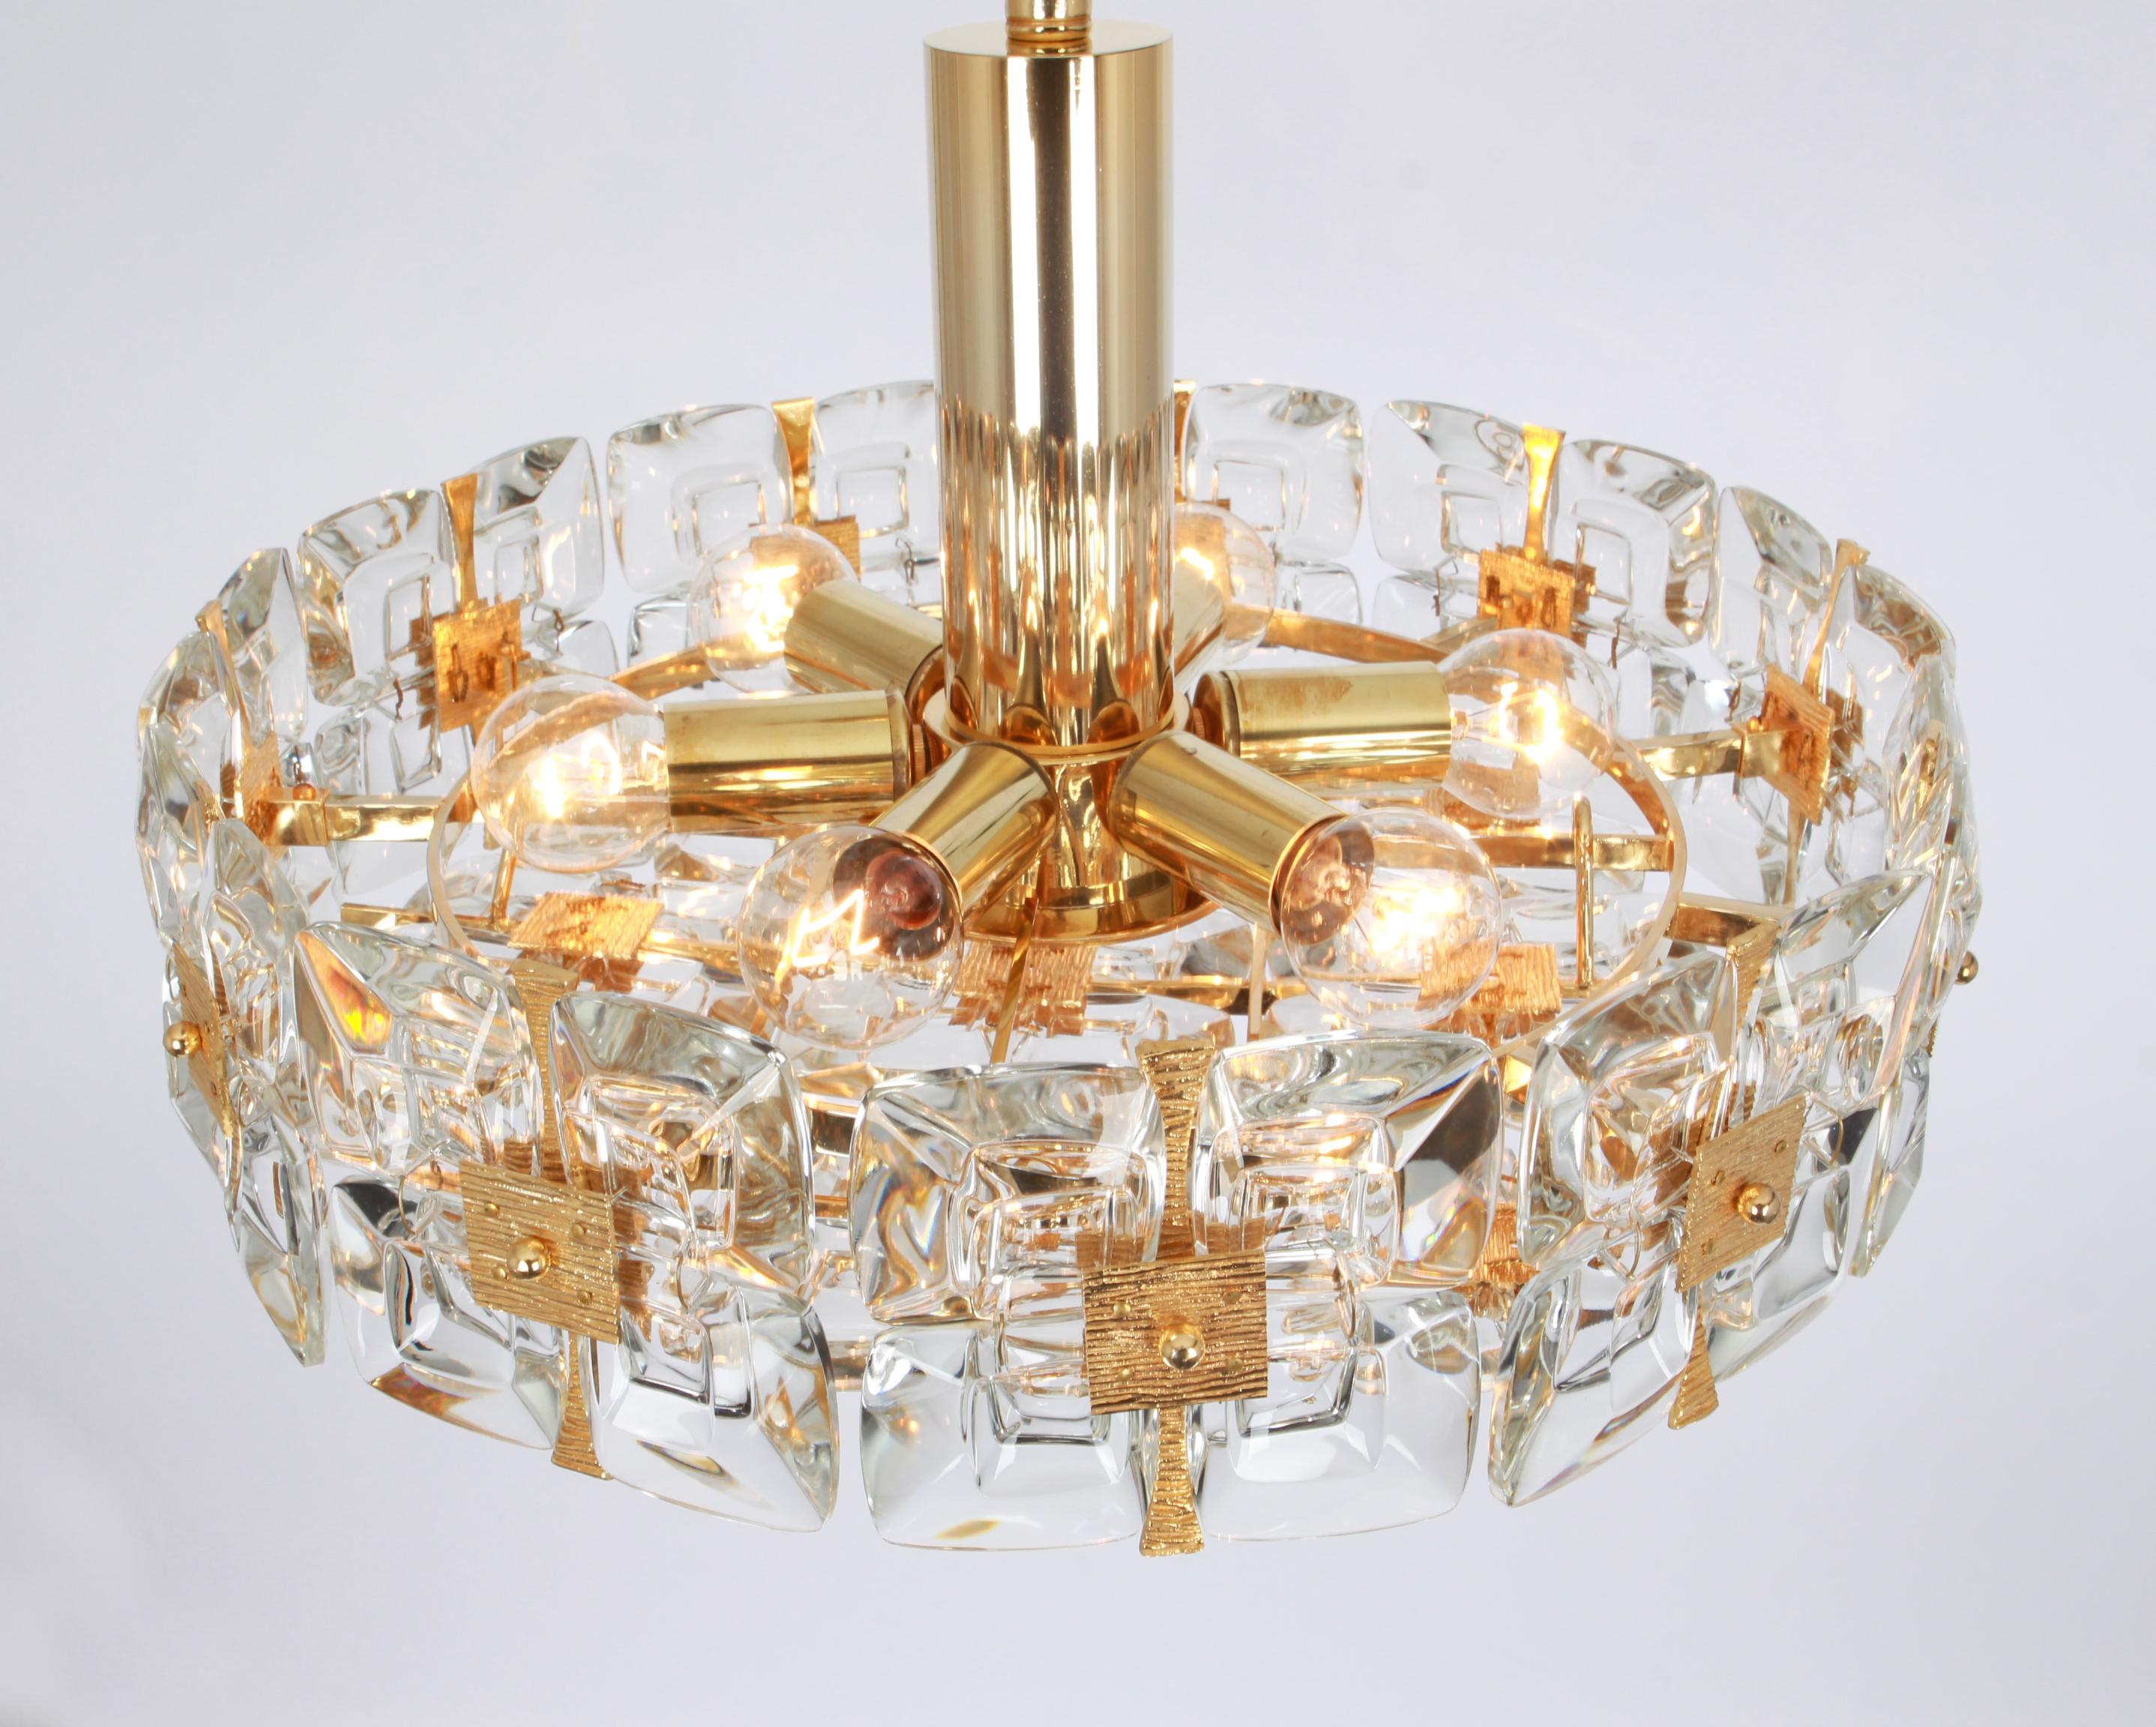 Gilt Brass and Crystal Chandelier, Sciolari Design by Palwa, Germany, 1970s For Sale 1